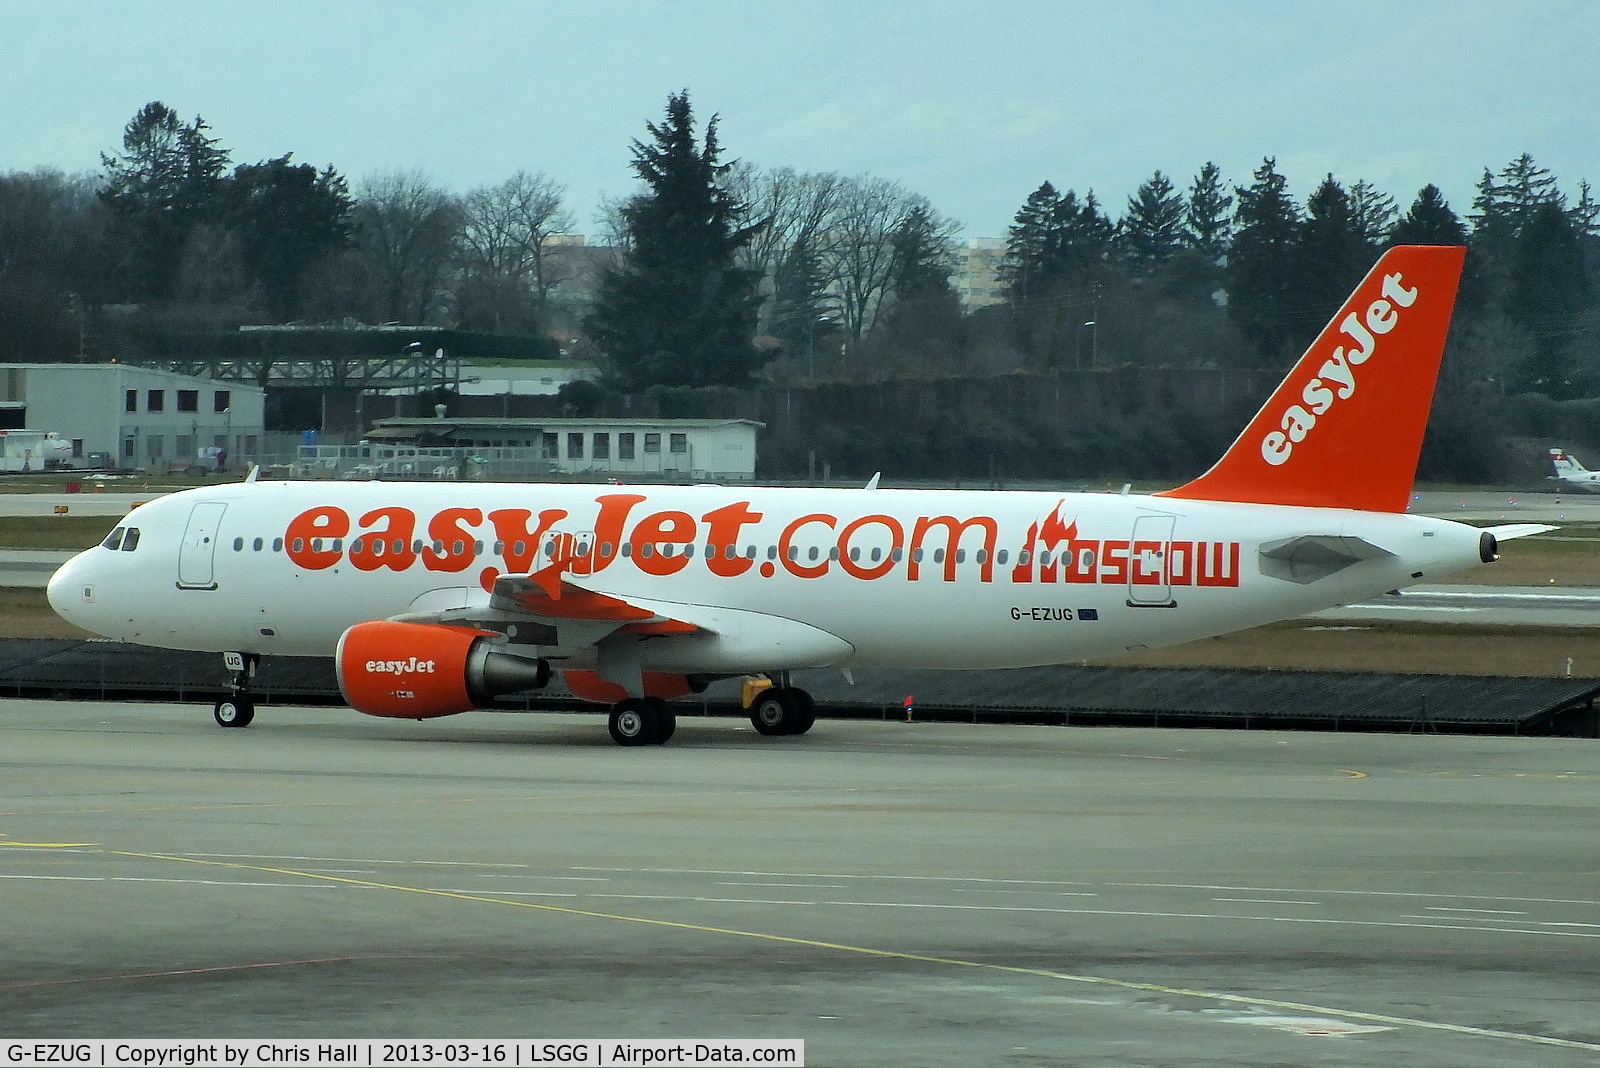 G-EZUG, 2011 Airbus A320-214 C/N 4680, easyJet A320 now with 